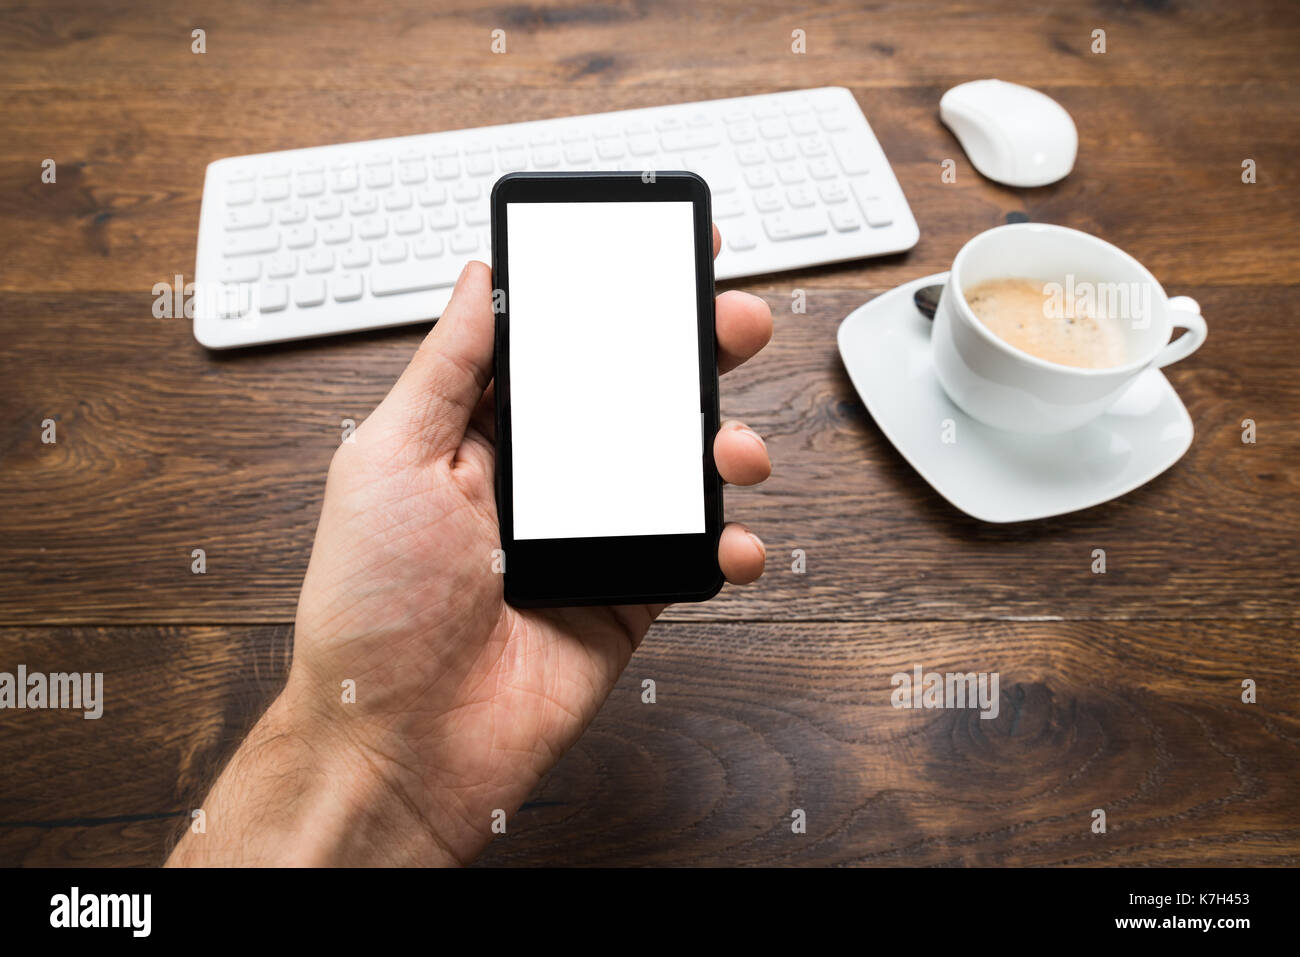 Close-up Of Person Hand Holding Mobile Phone With Cup Of Tea On Desk Stock Photo